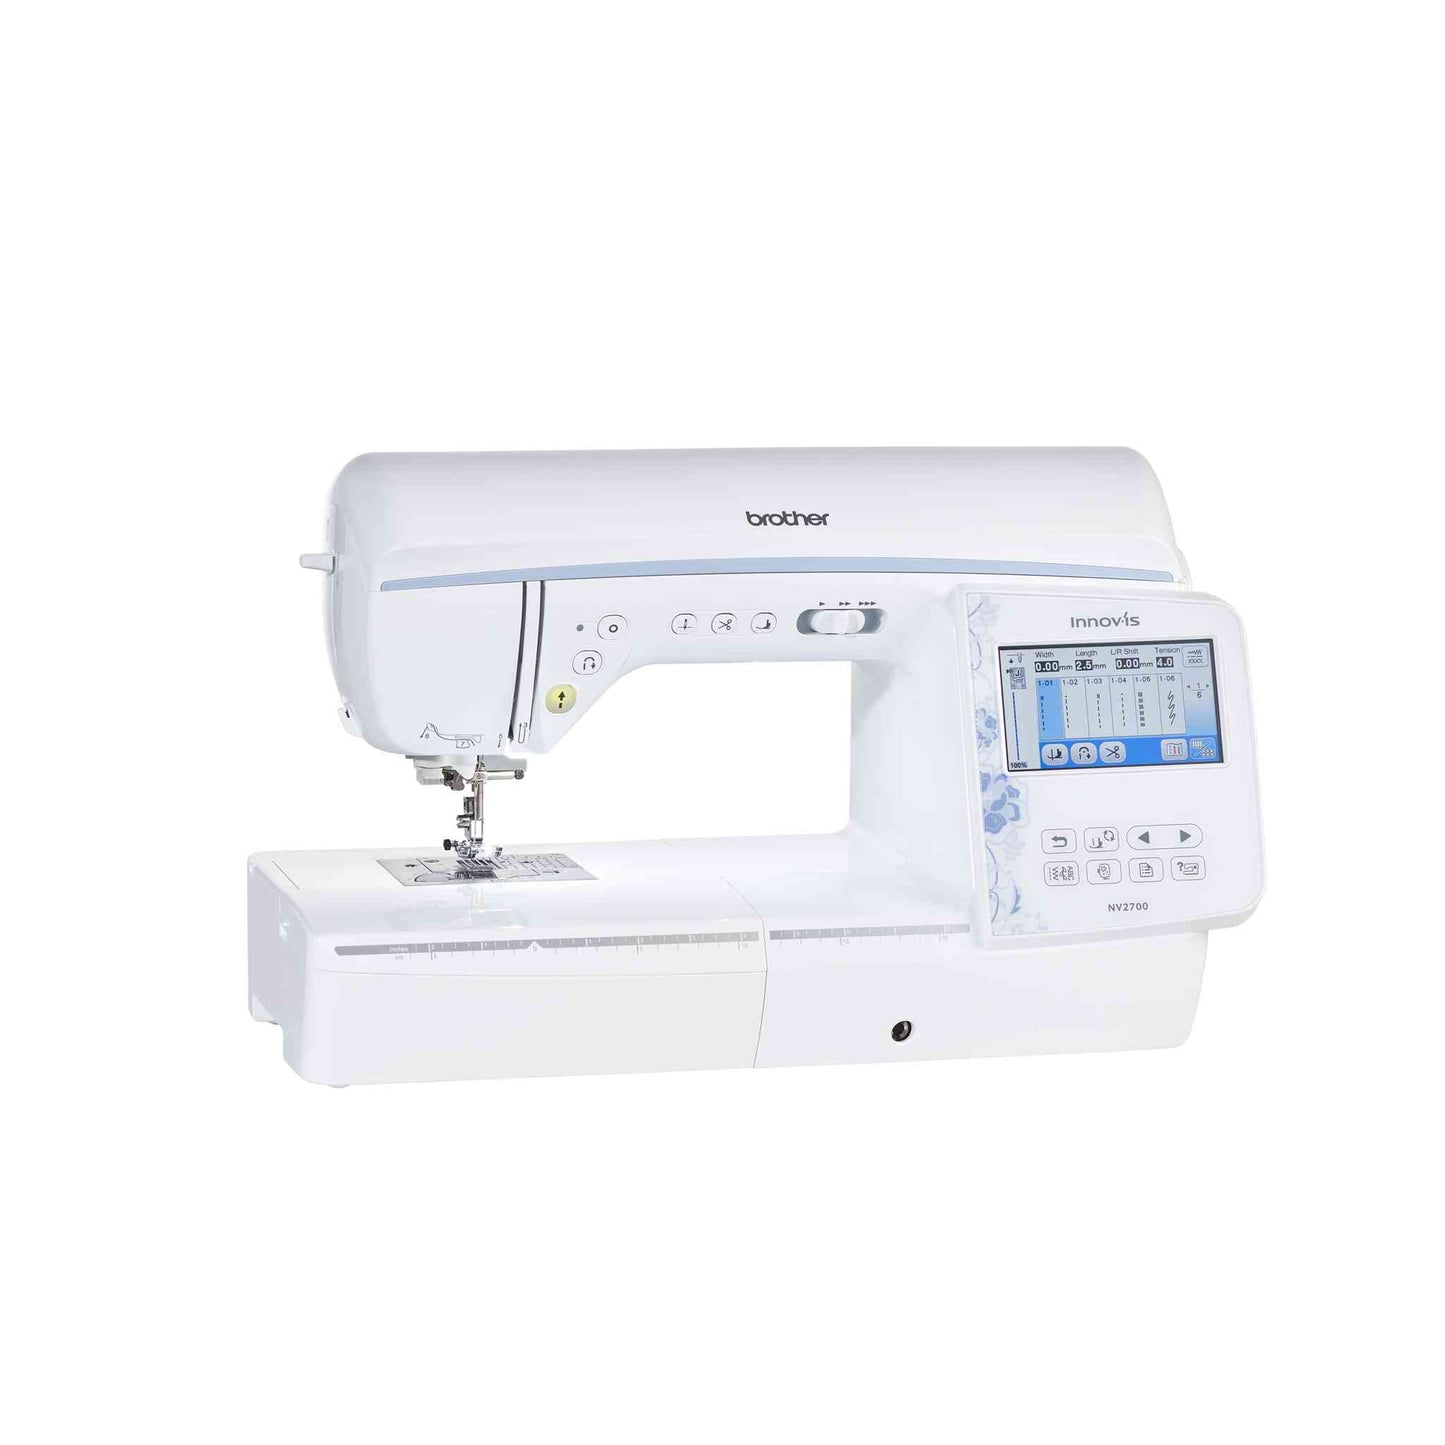 brother nv2700 sewing and embroidery machine right facing